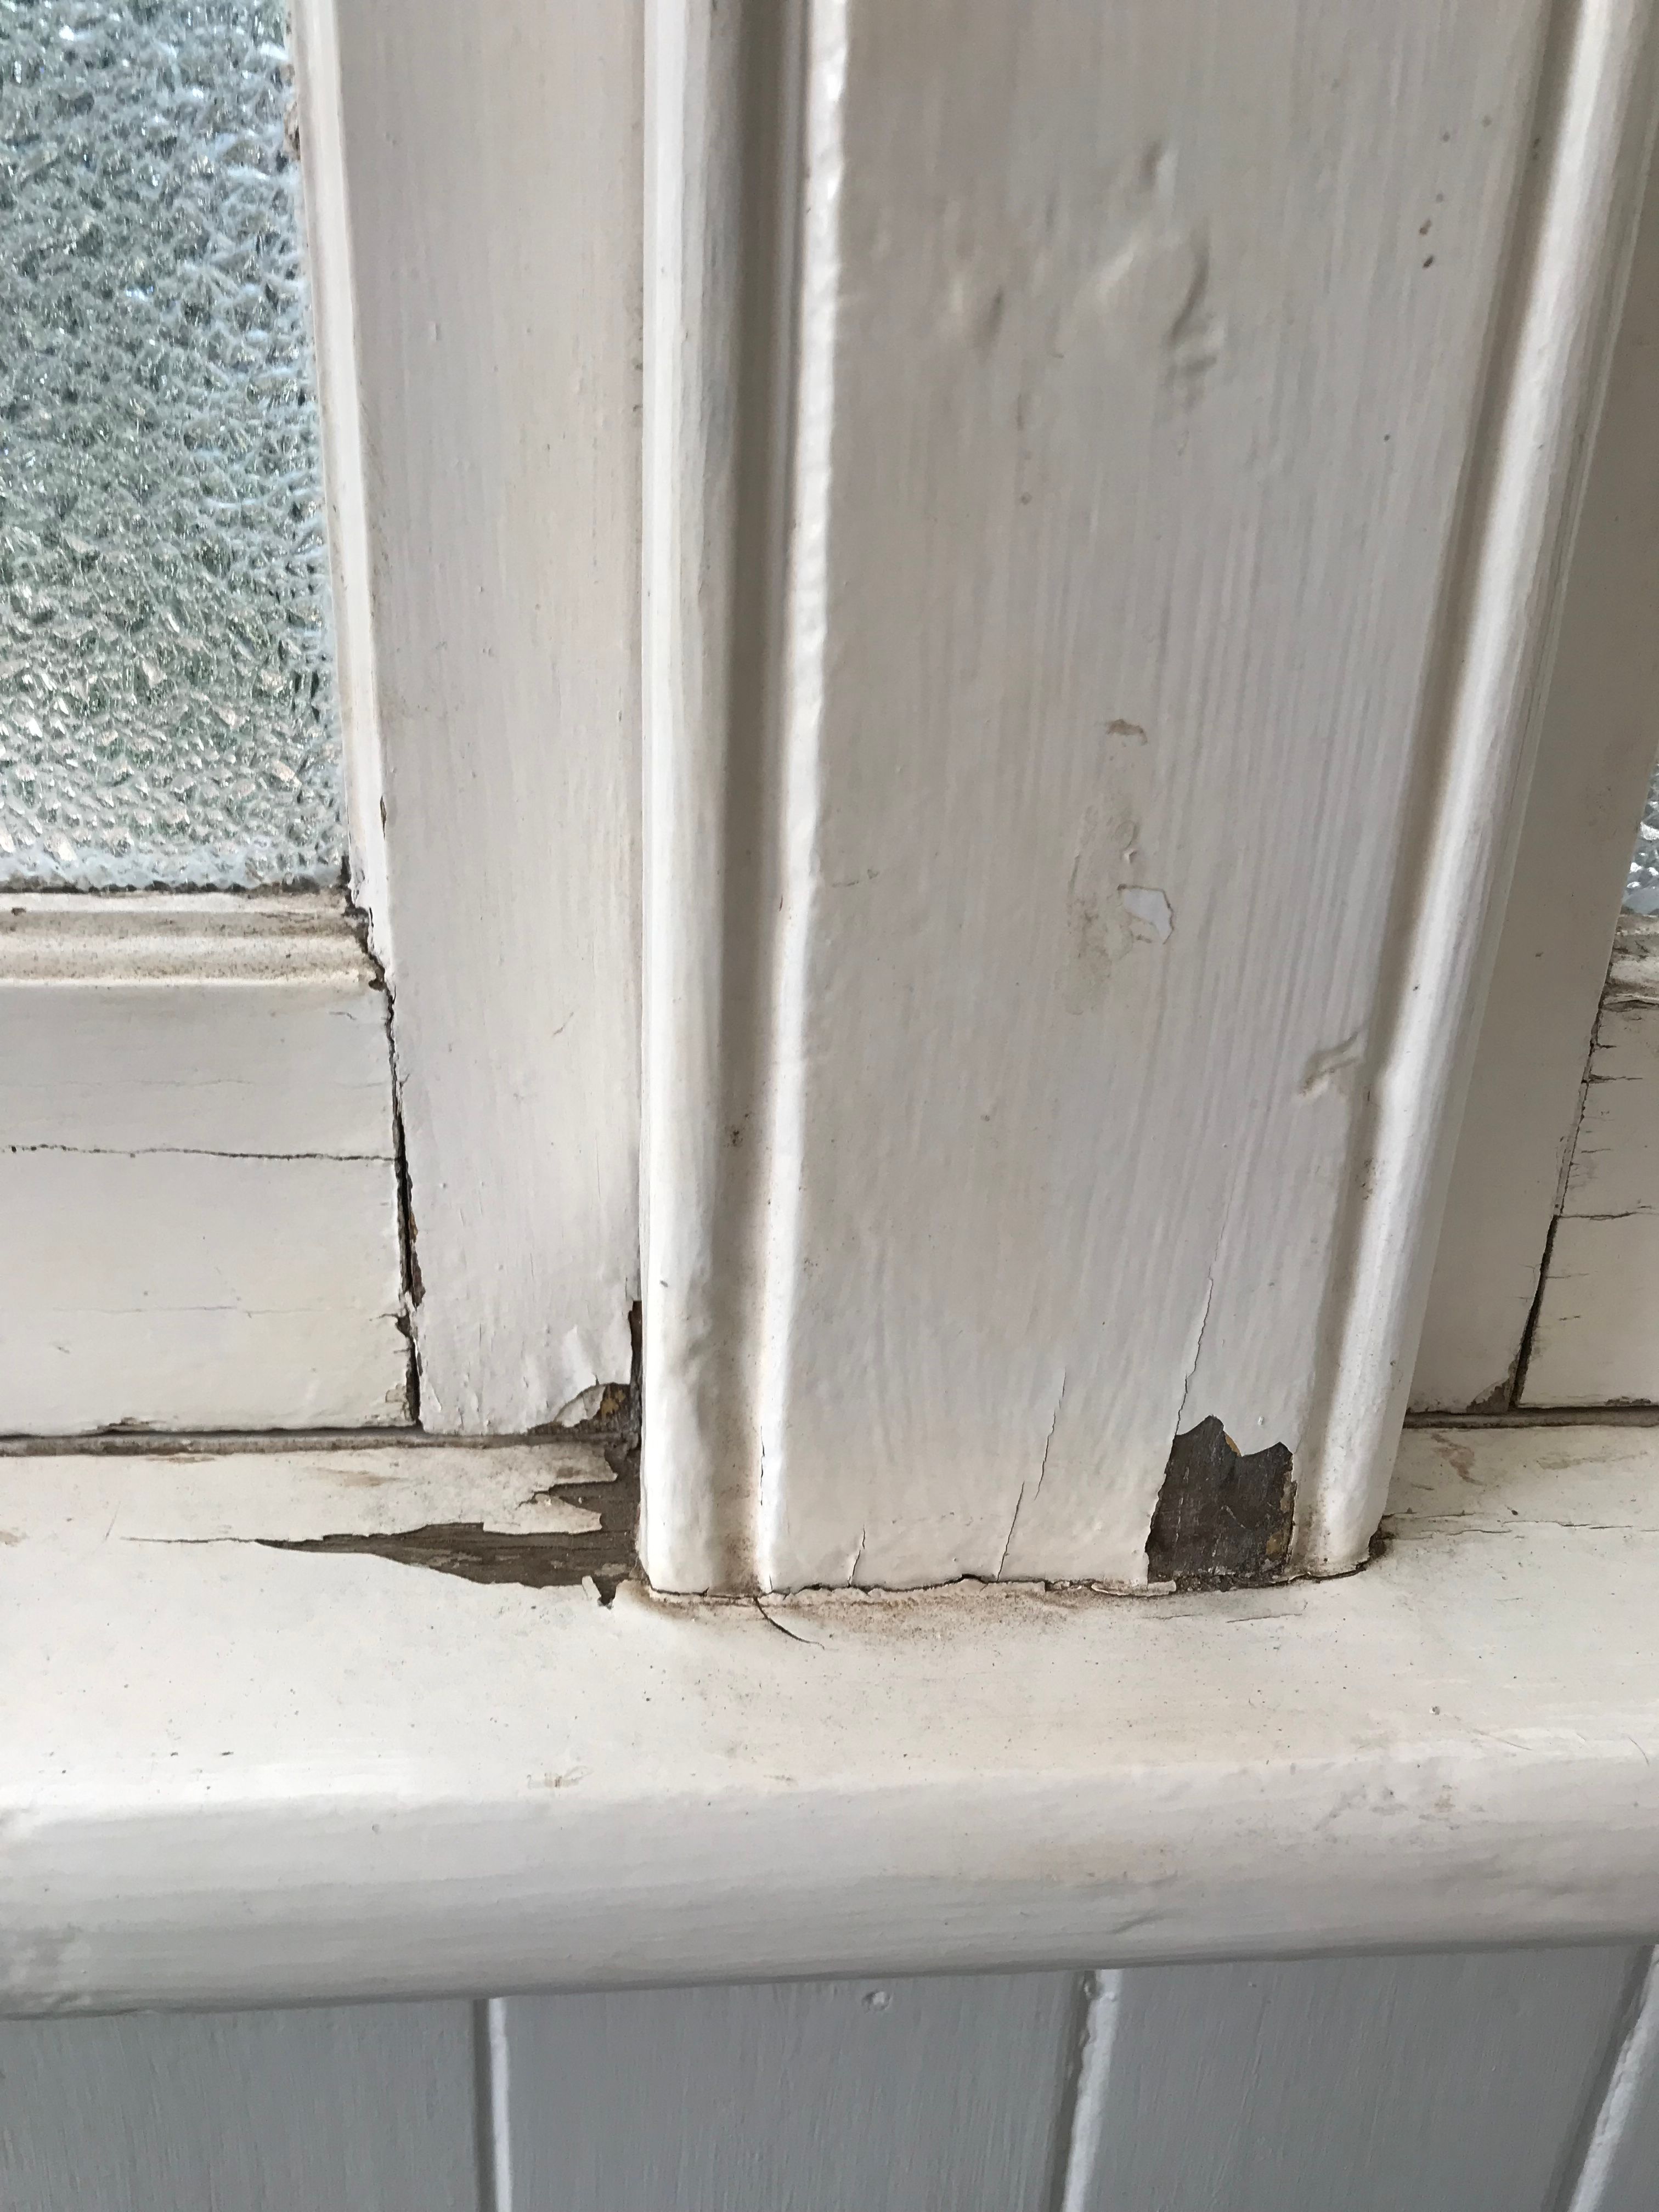 How to fix flaking paint on window frame... | Bunnings Workshop community